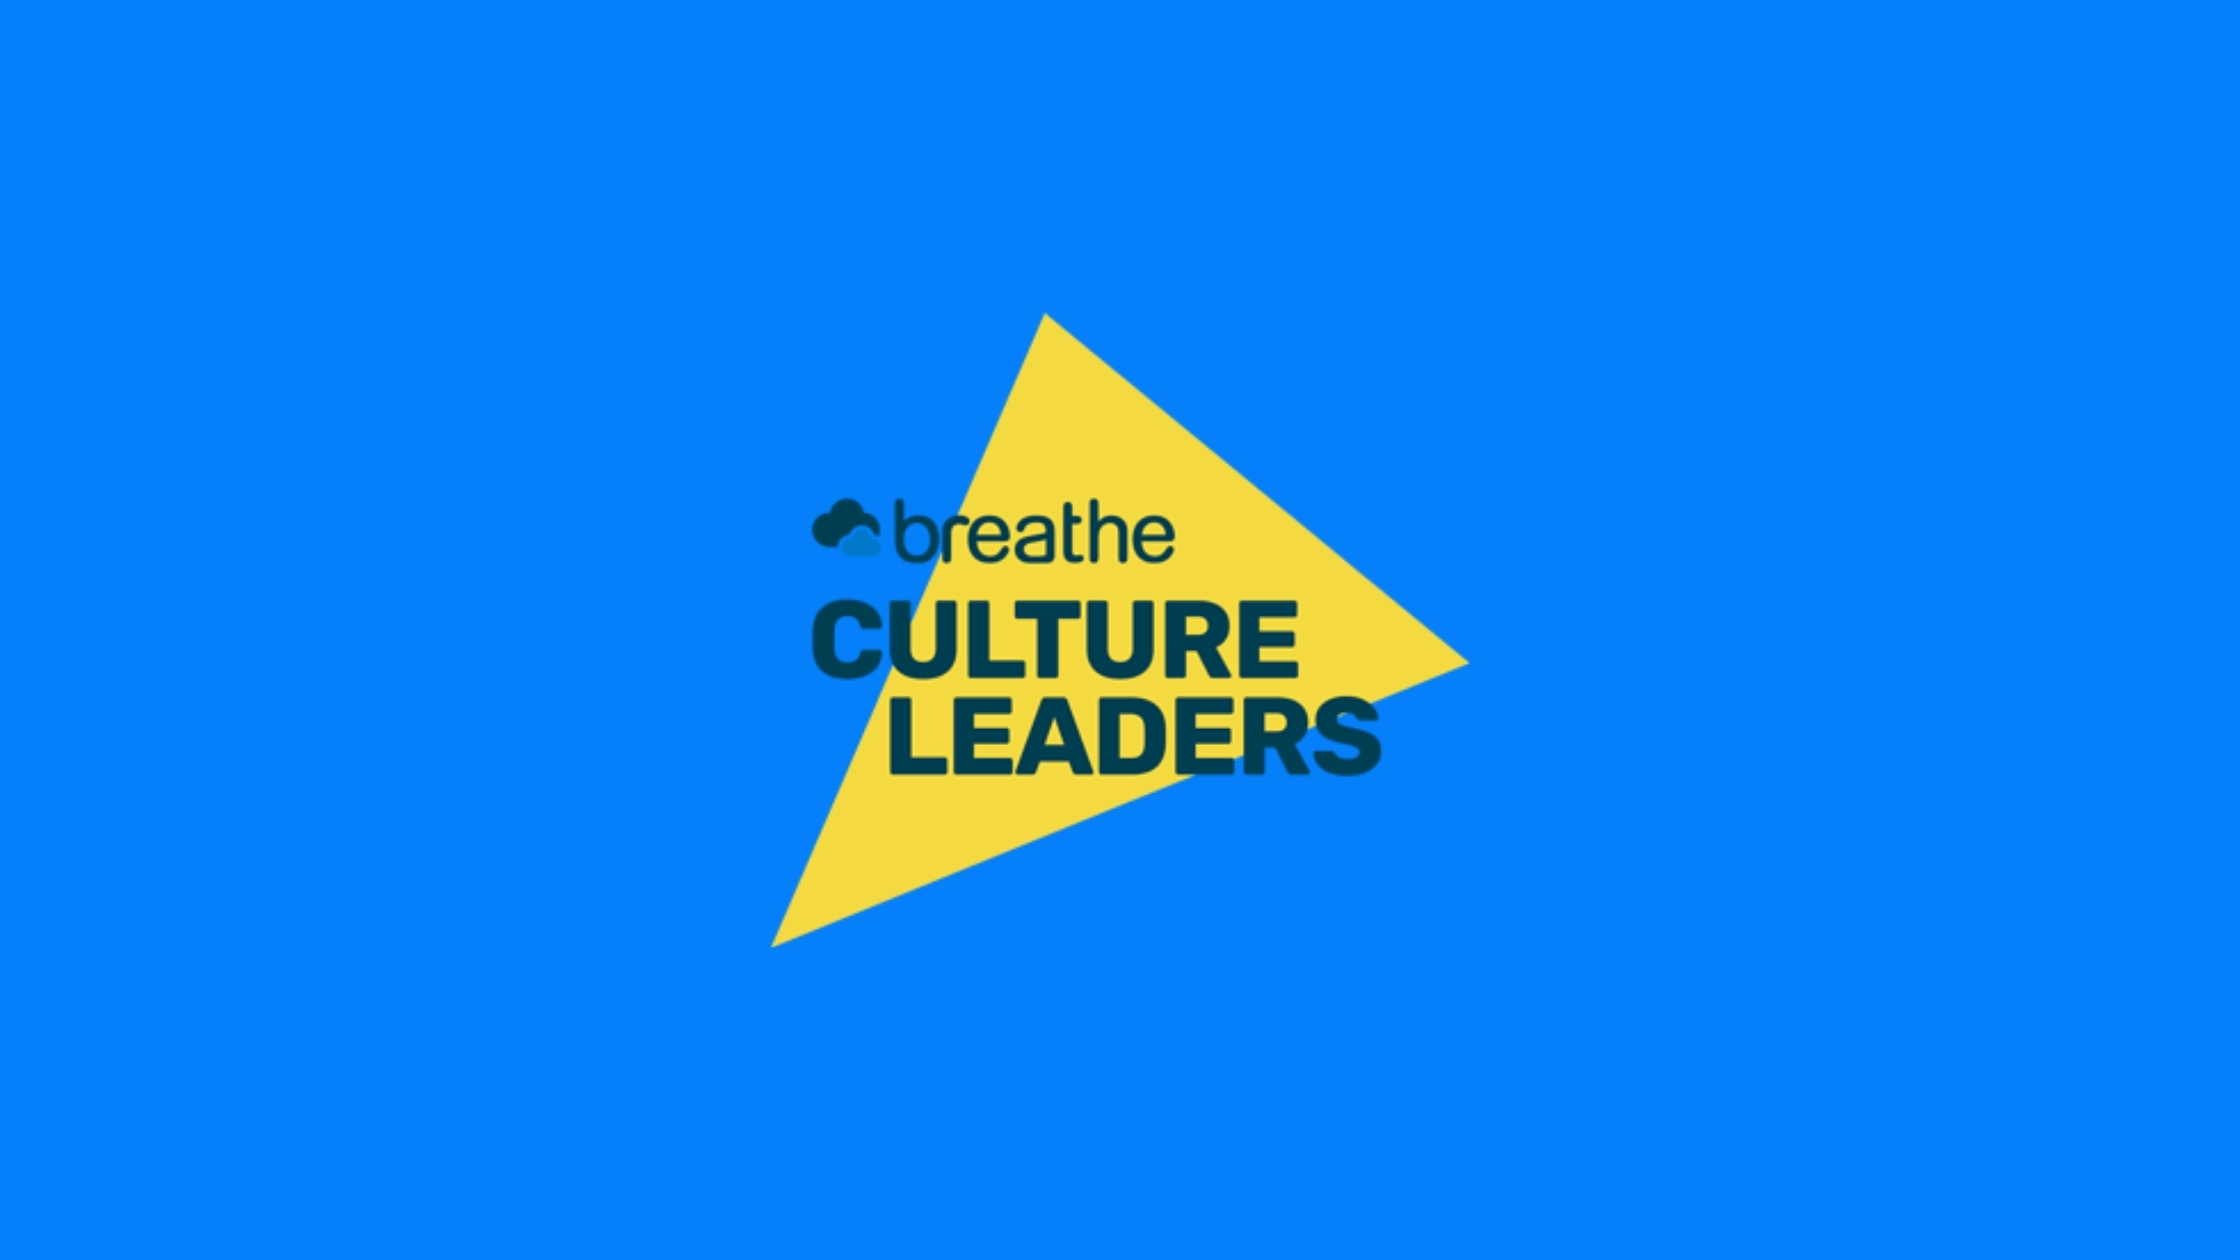 Vestd named one of the UK's Culture Leaders